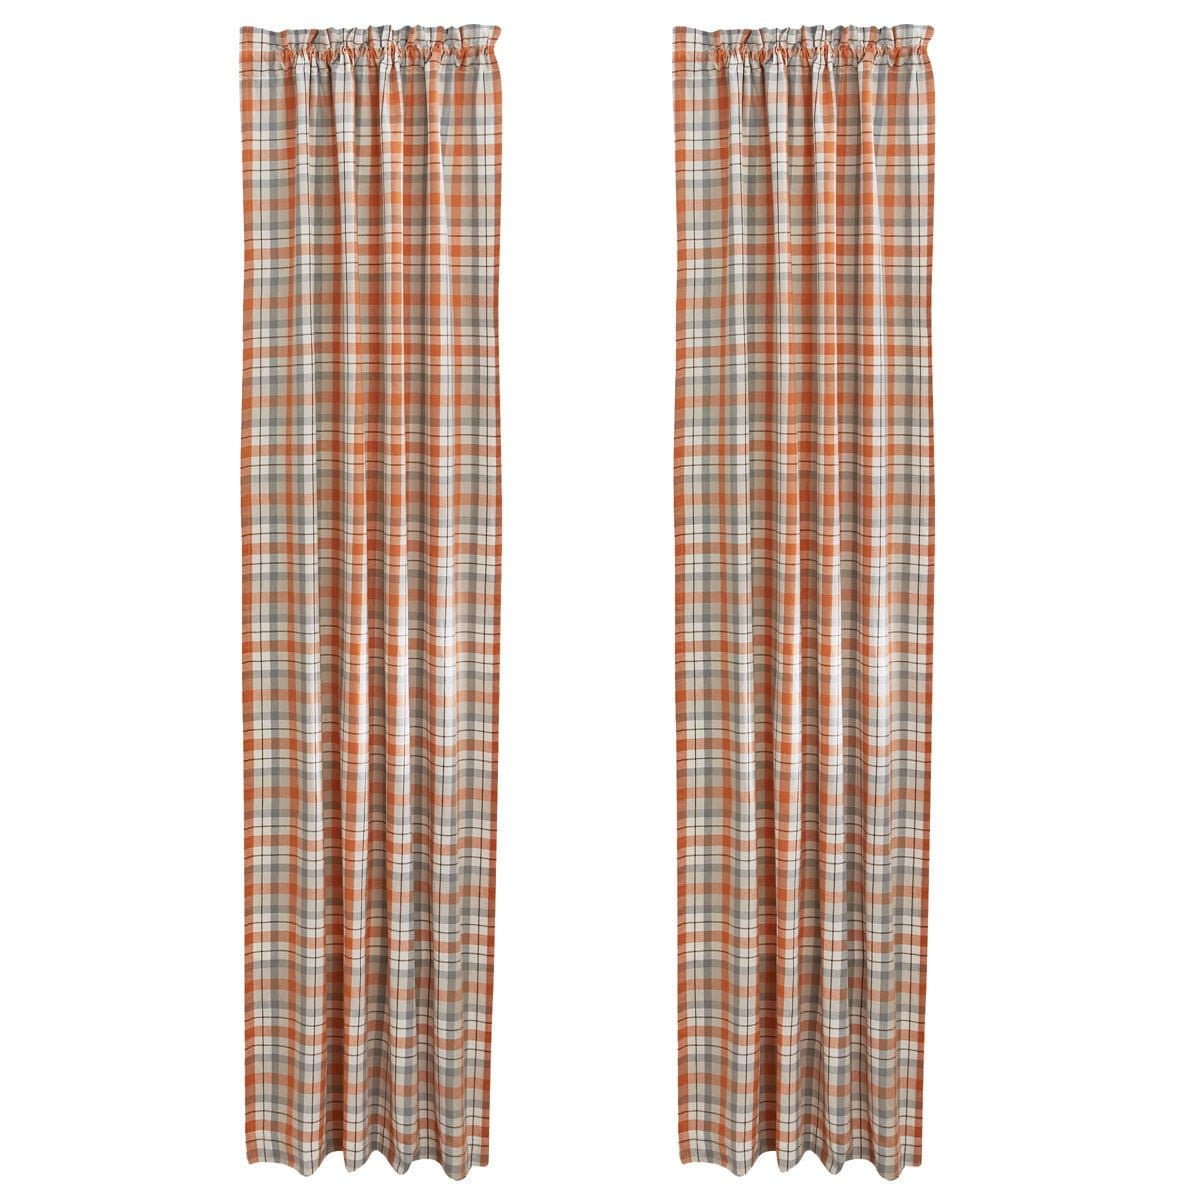 Apricot & Stone Panel Pair With Tie Backs 84" Long Lined-Park Designs-The Village Merchant